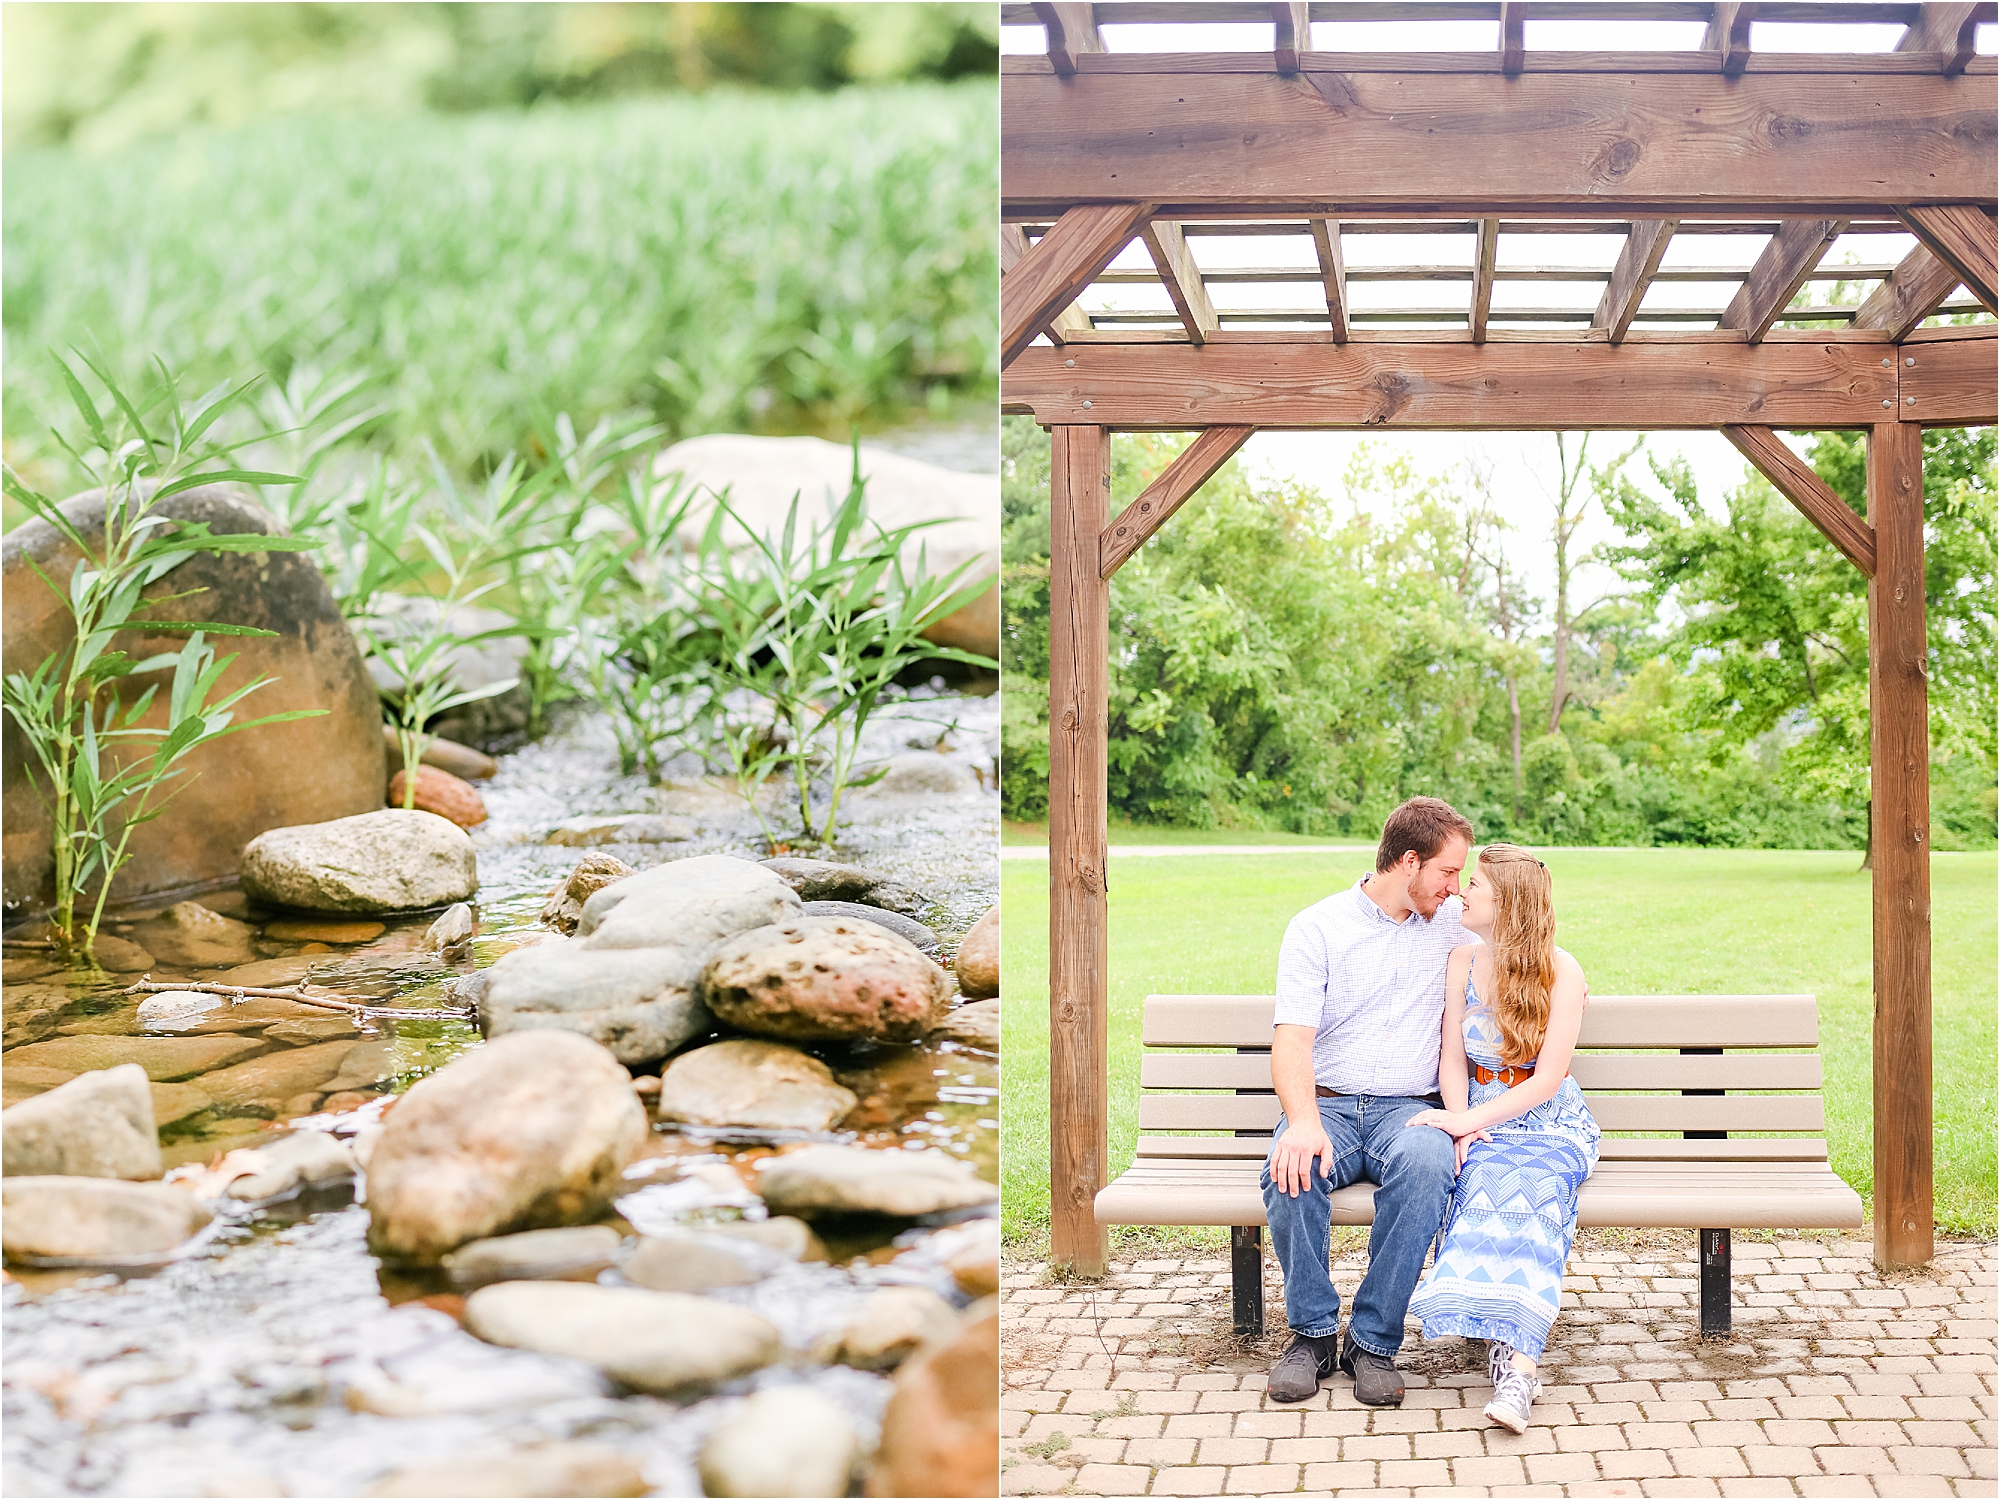 Engagement session at Green Hill Park in Roanoke, Virginia.